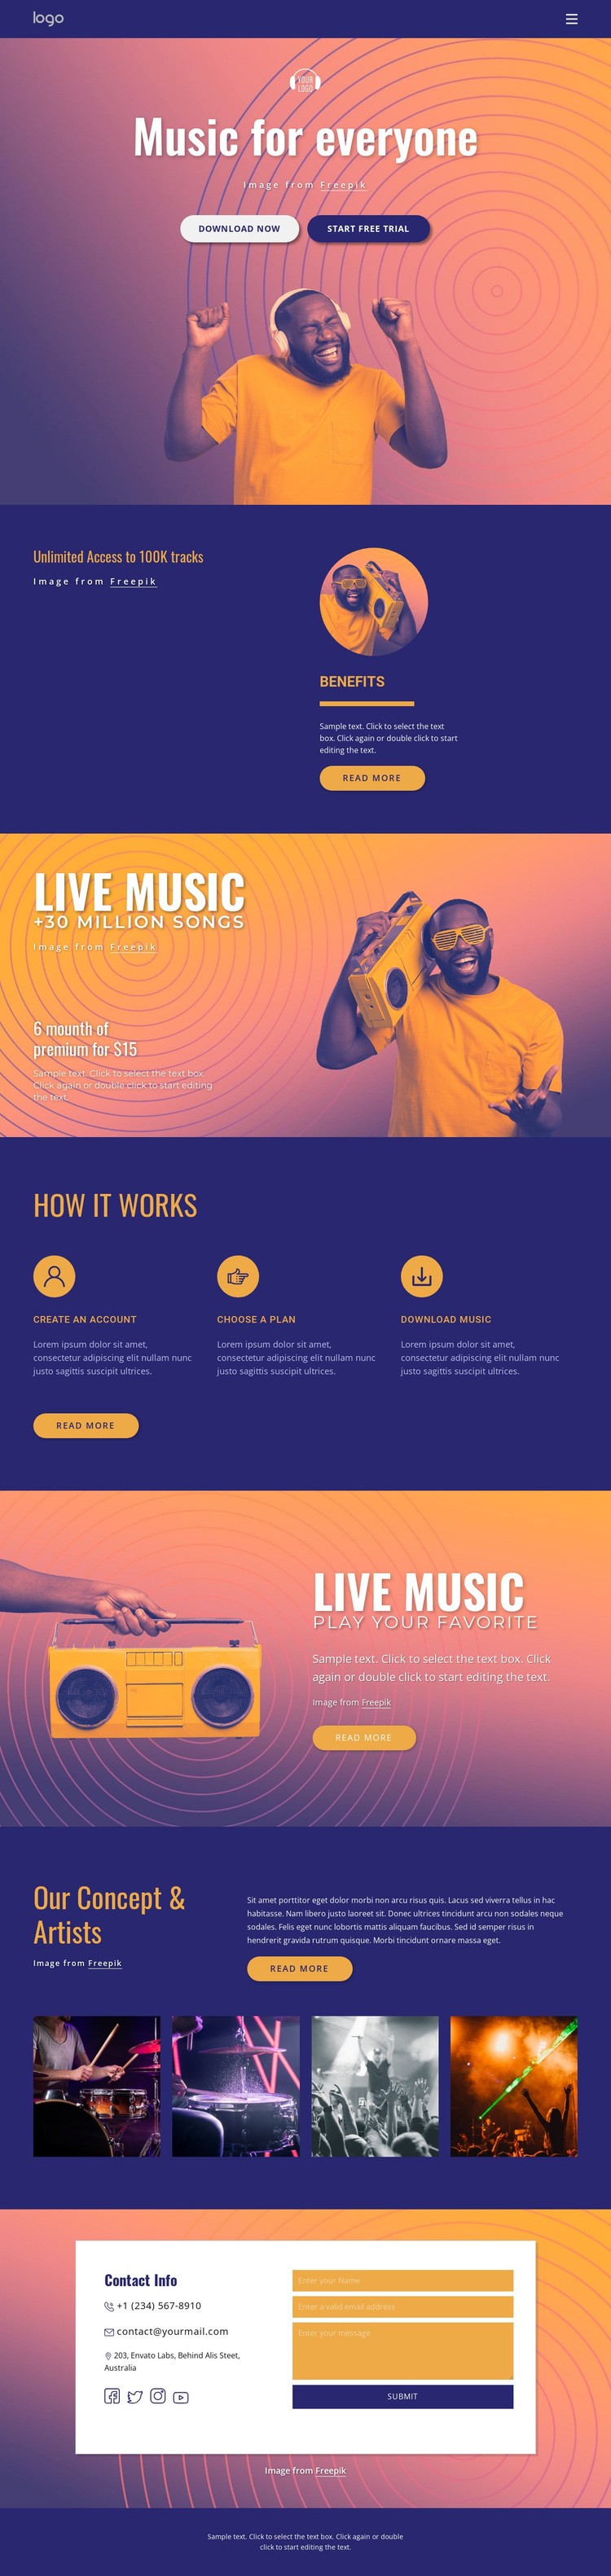 Music for everyone Homepage Design